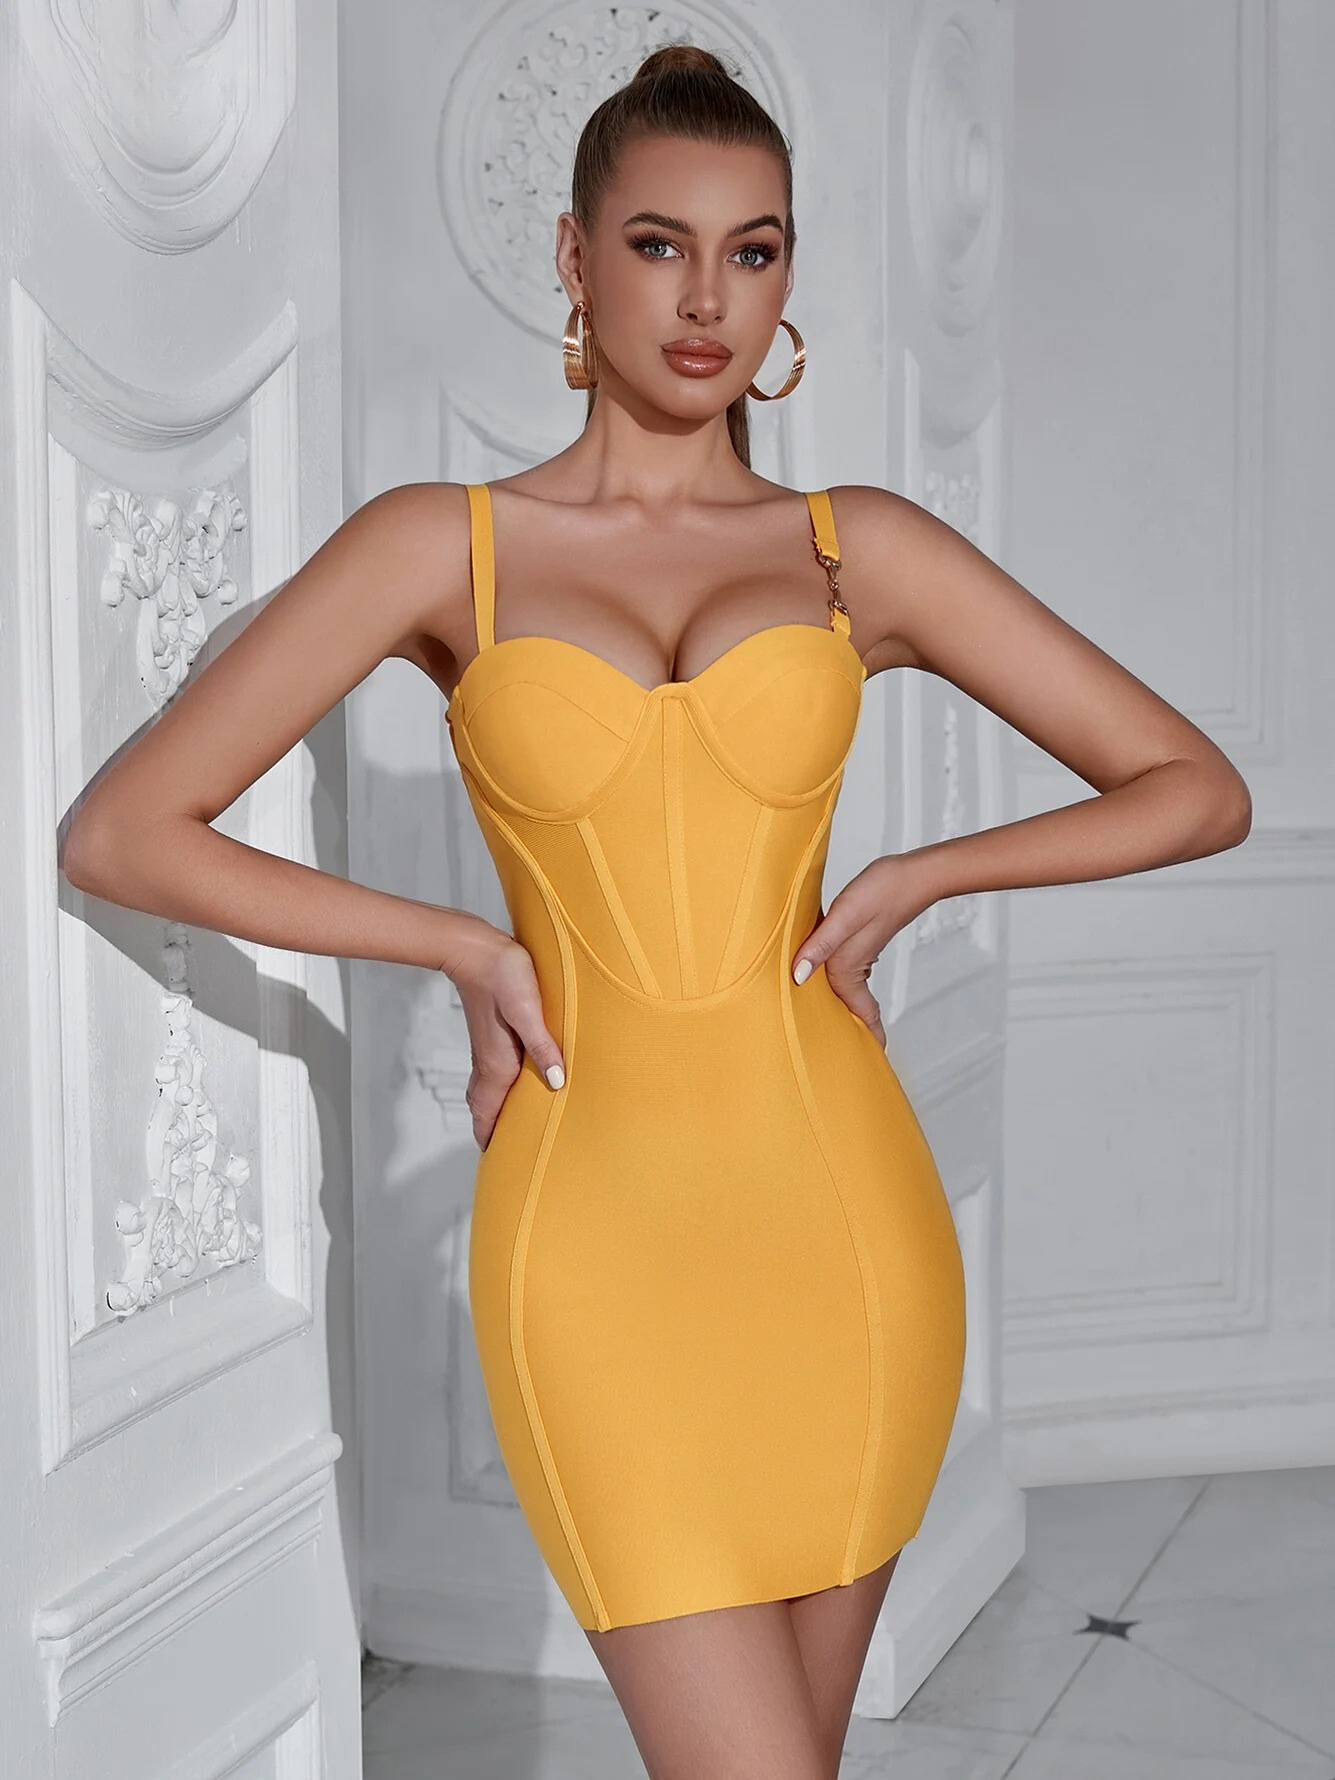 A woman wearing a yellow strapless bodycon dress and gold hoop earings with her hands on her waist.